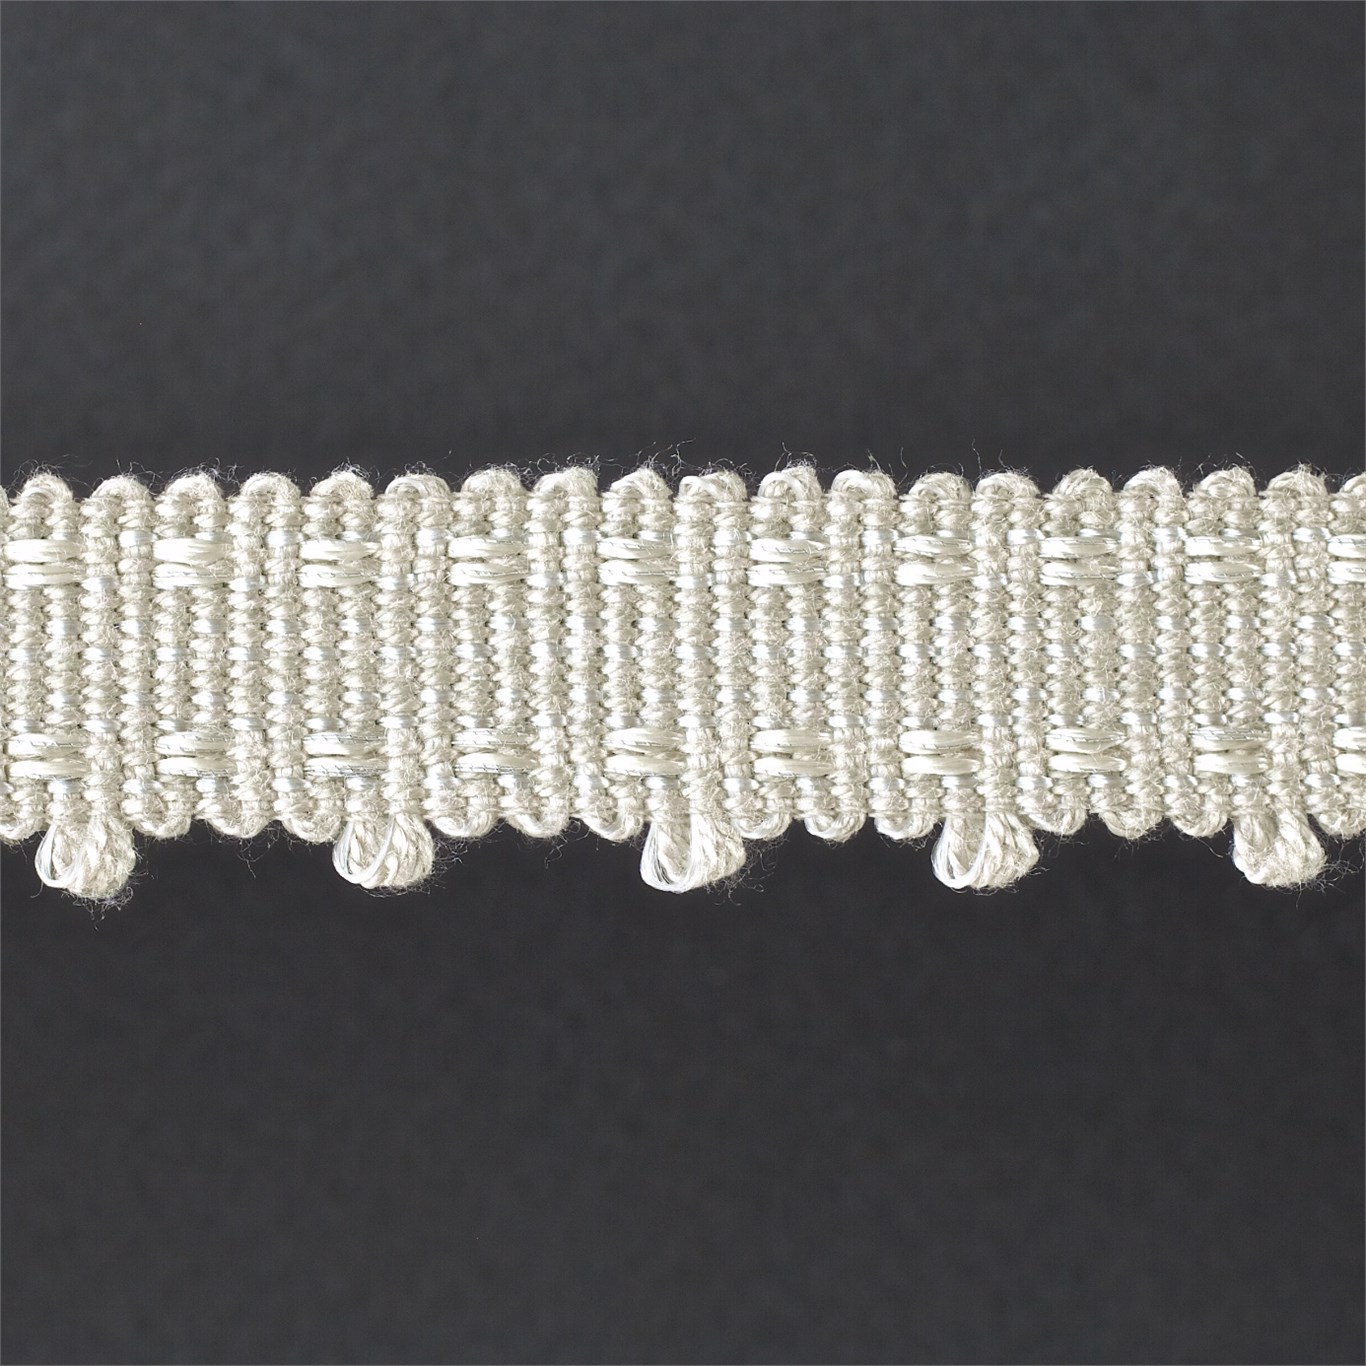 Walling Braid Silver Trimmings by ZOF